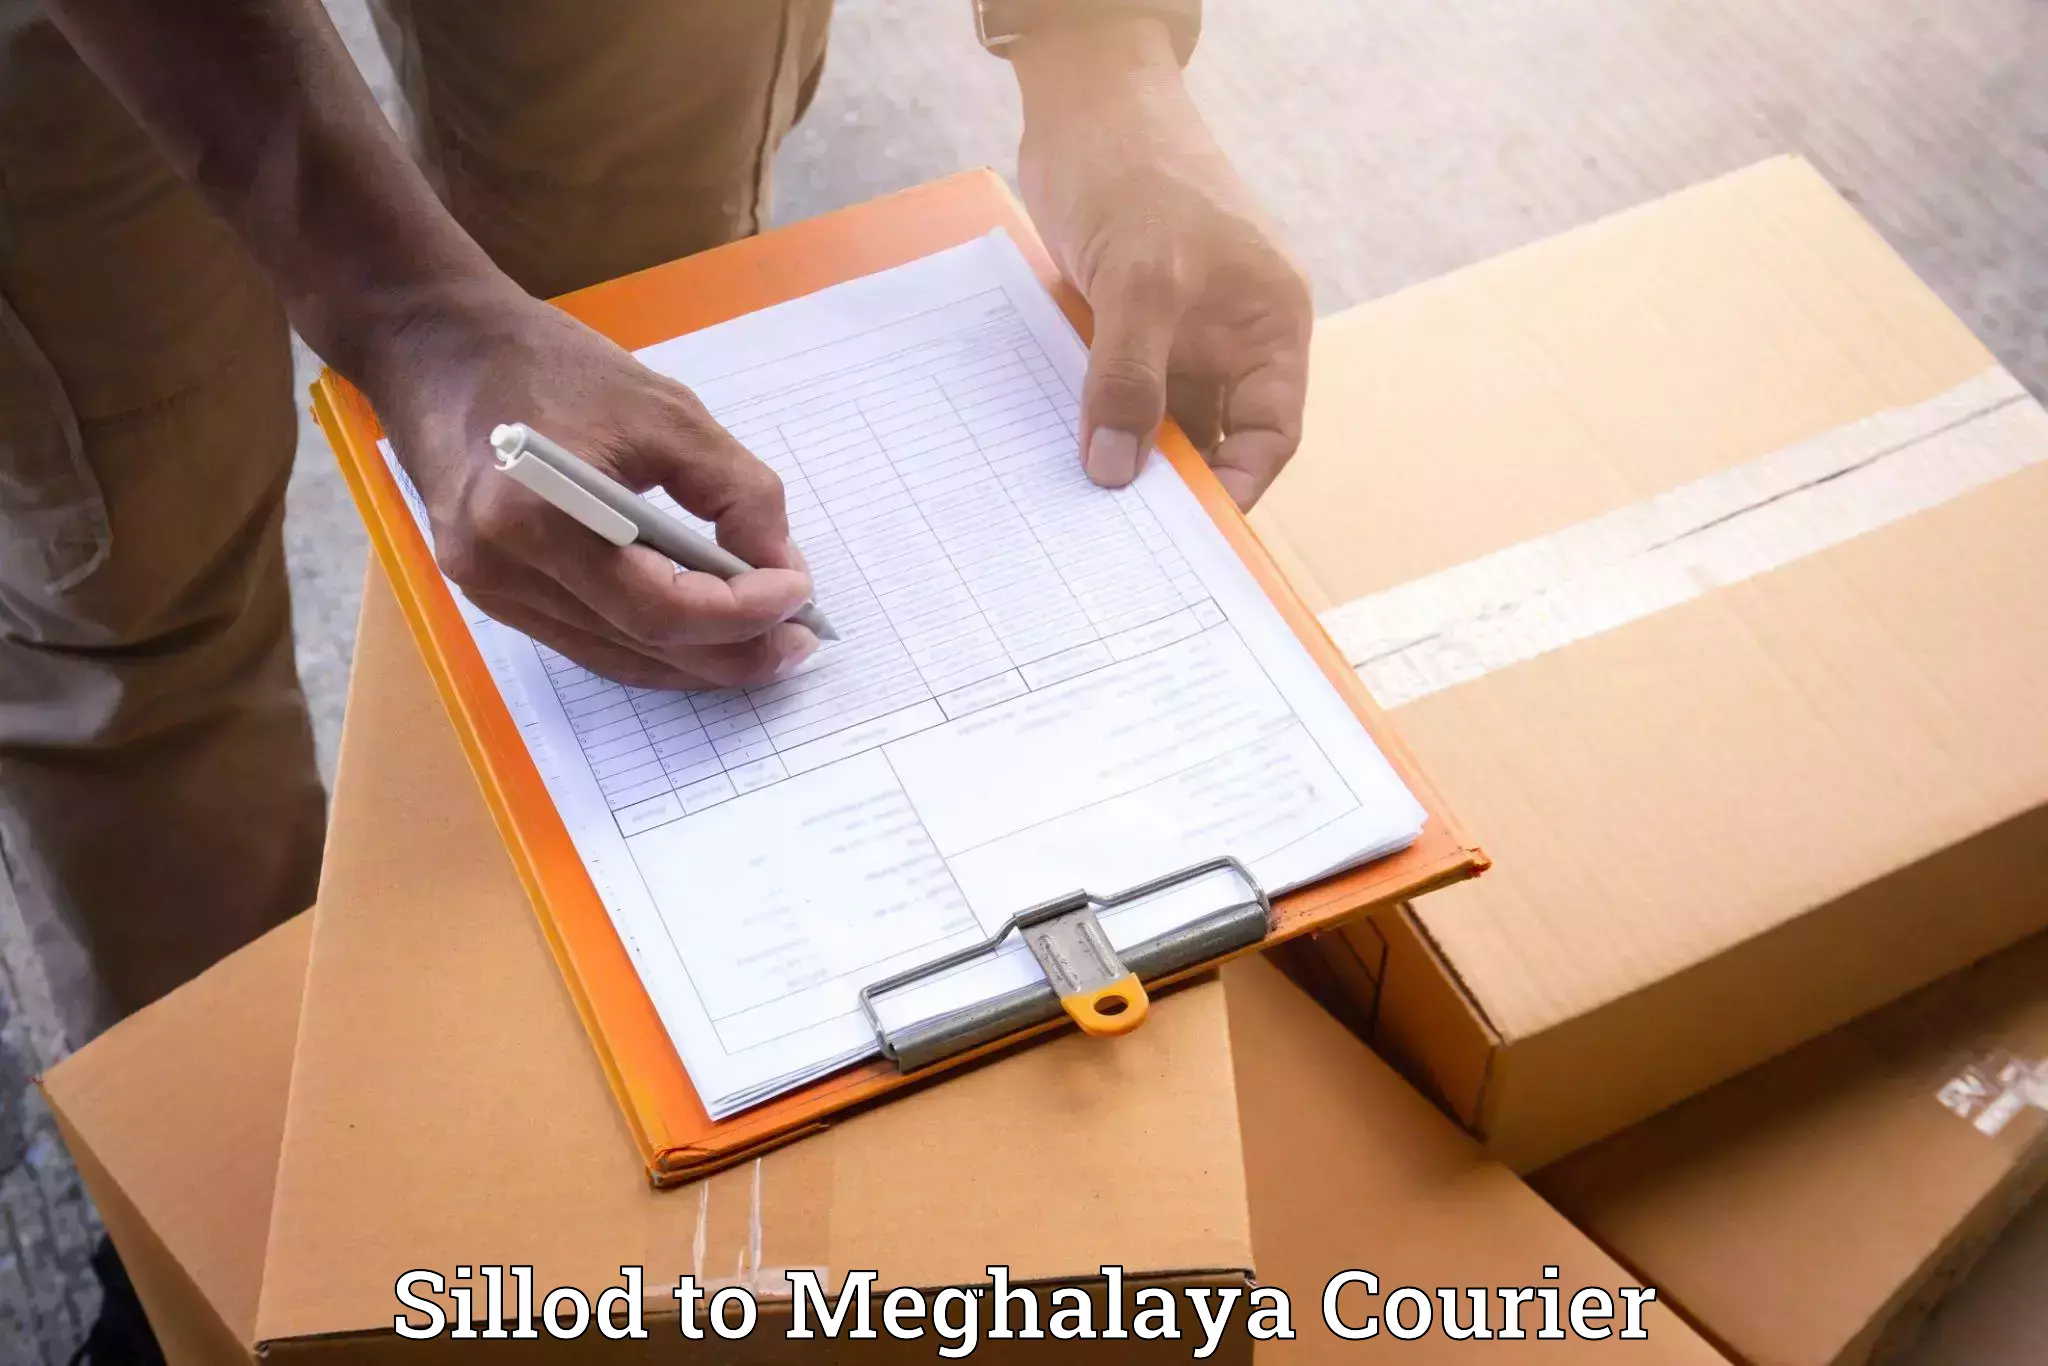 Smooth relocation services in Sillod to Shillong